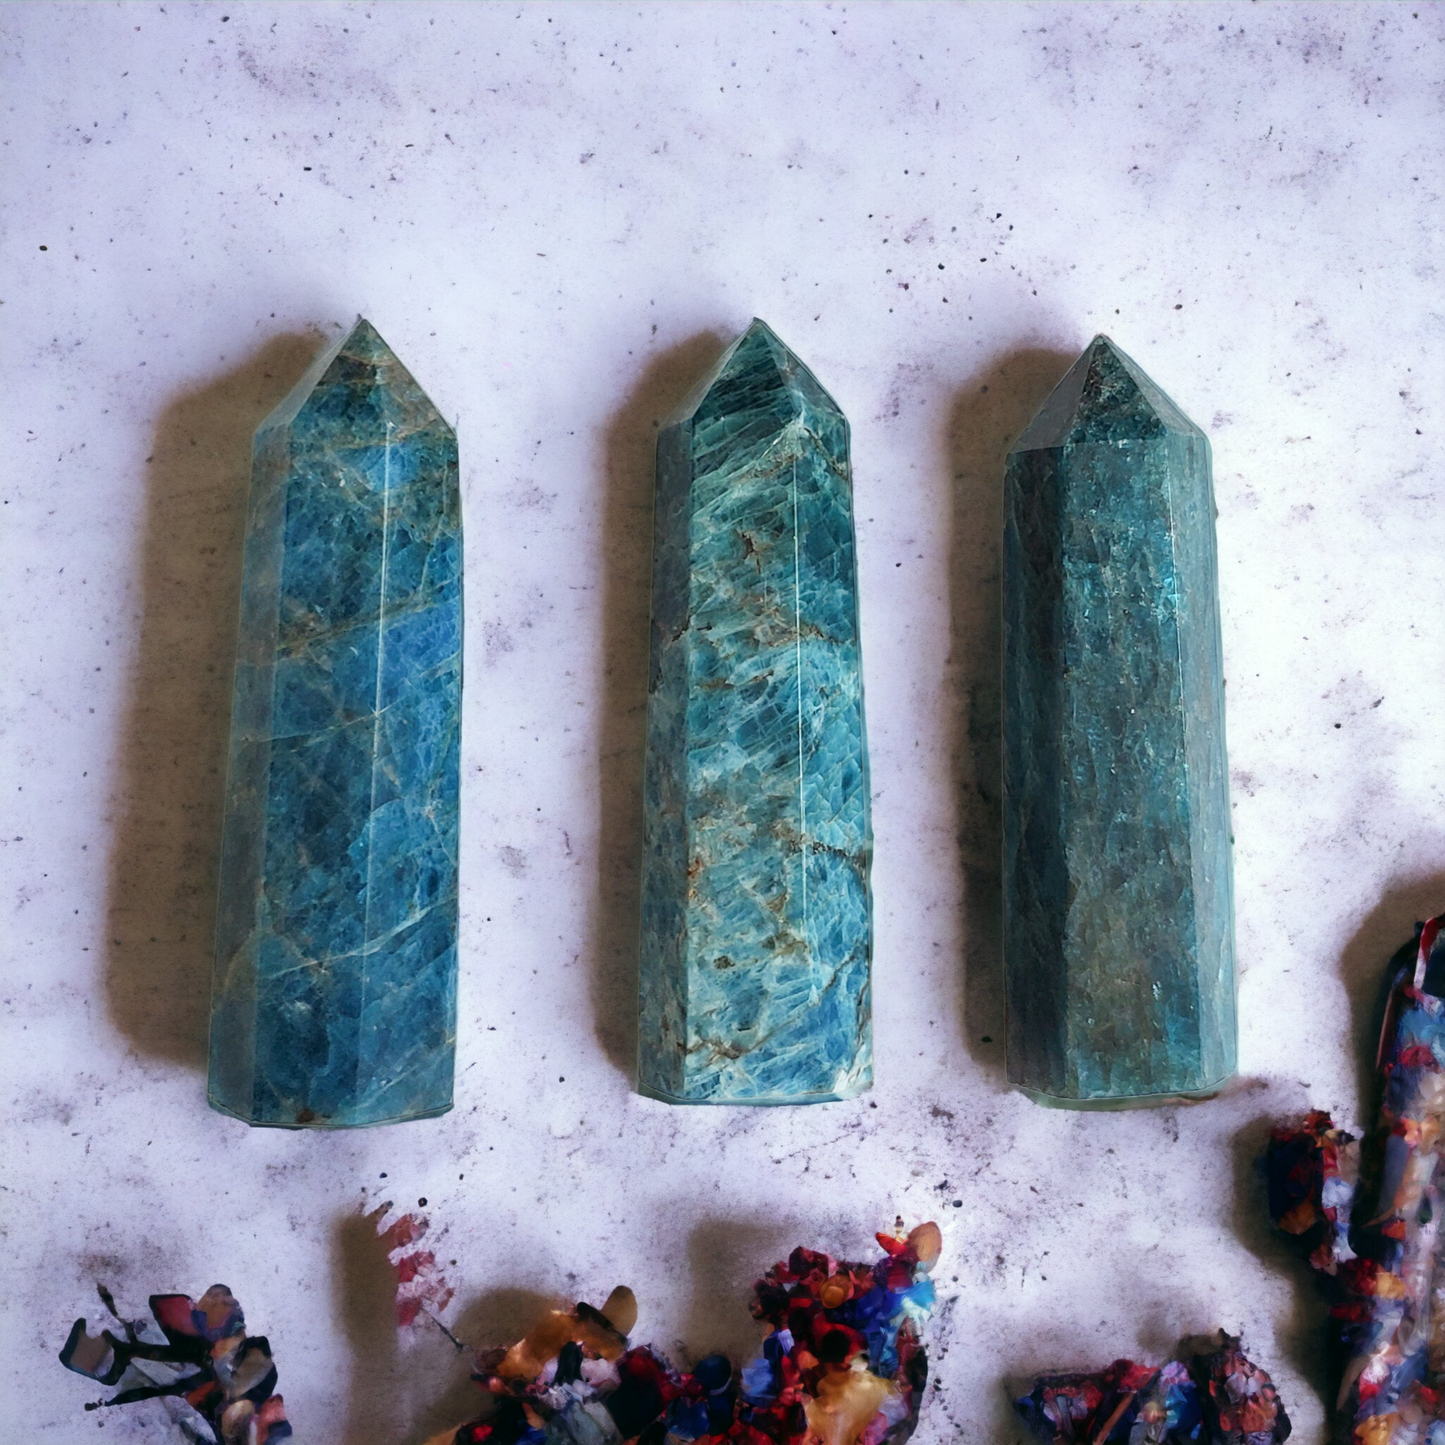 Blue Apatite Crystal Point 3 Inches